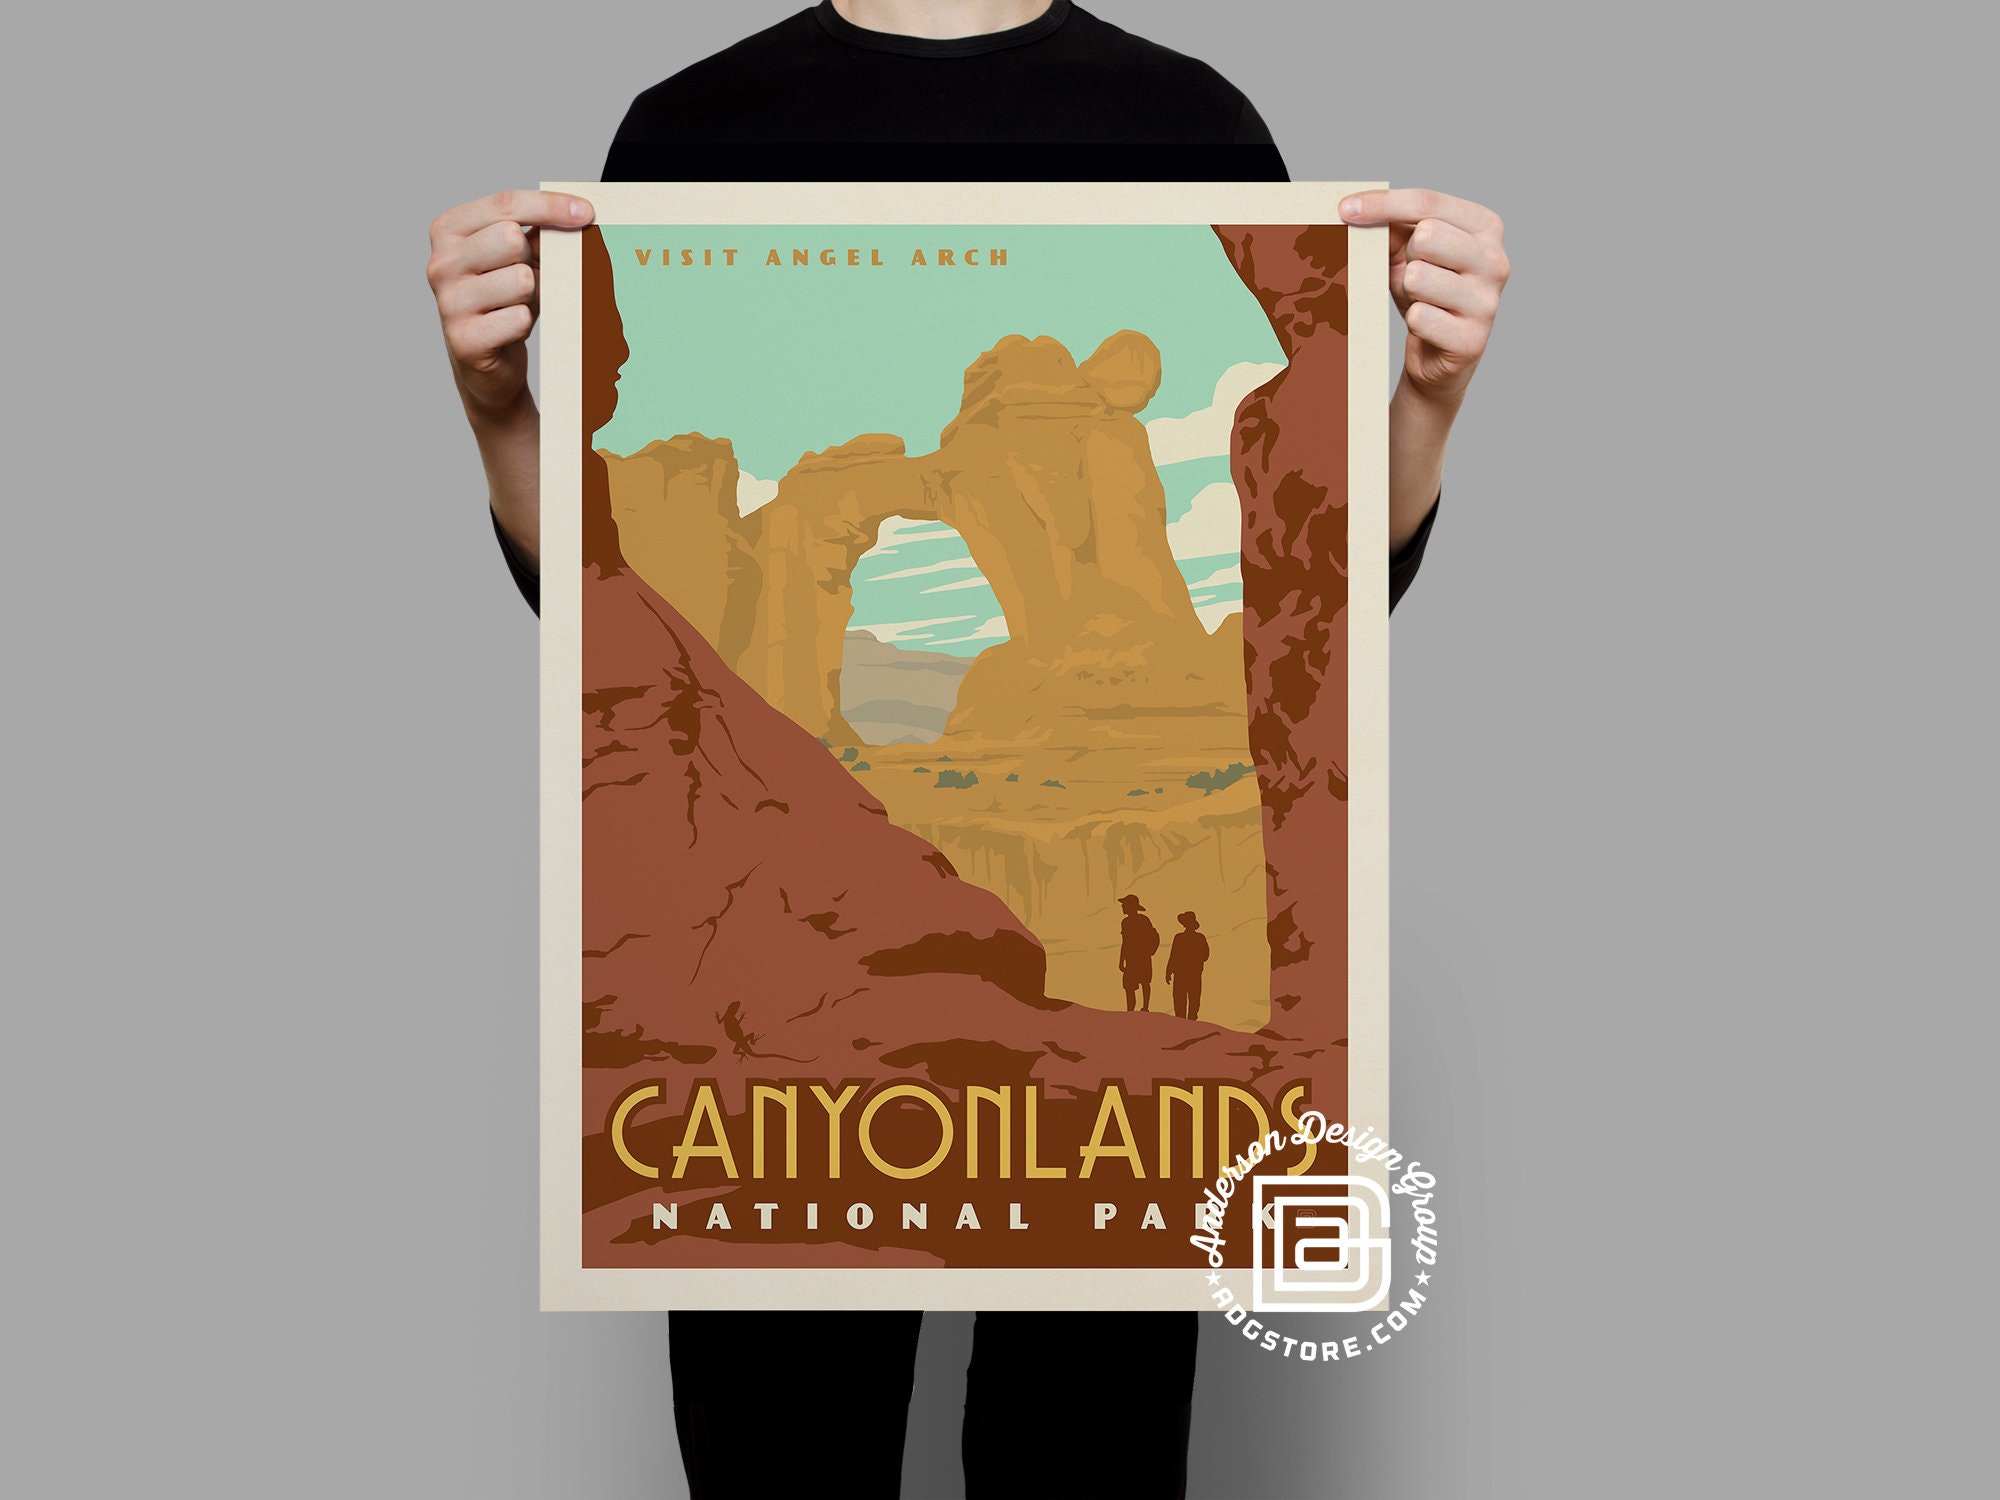 Canyonlands National Park Travel Poster by Anderson Design | Etsy